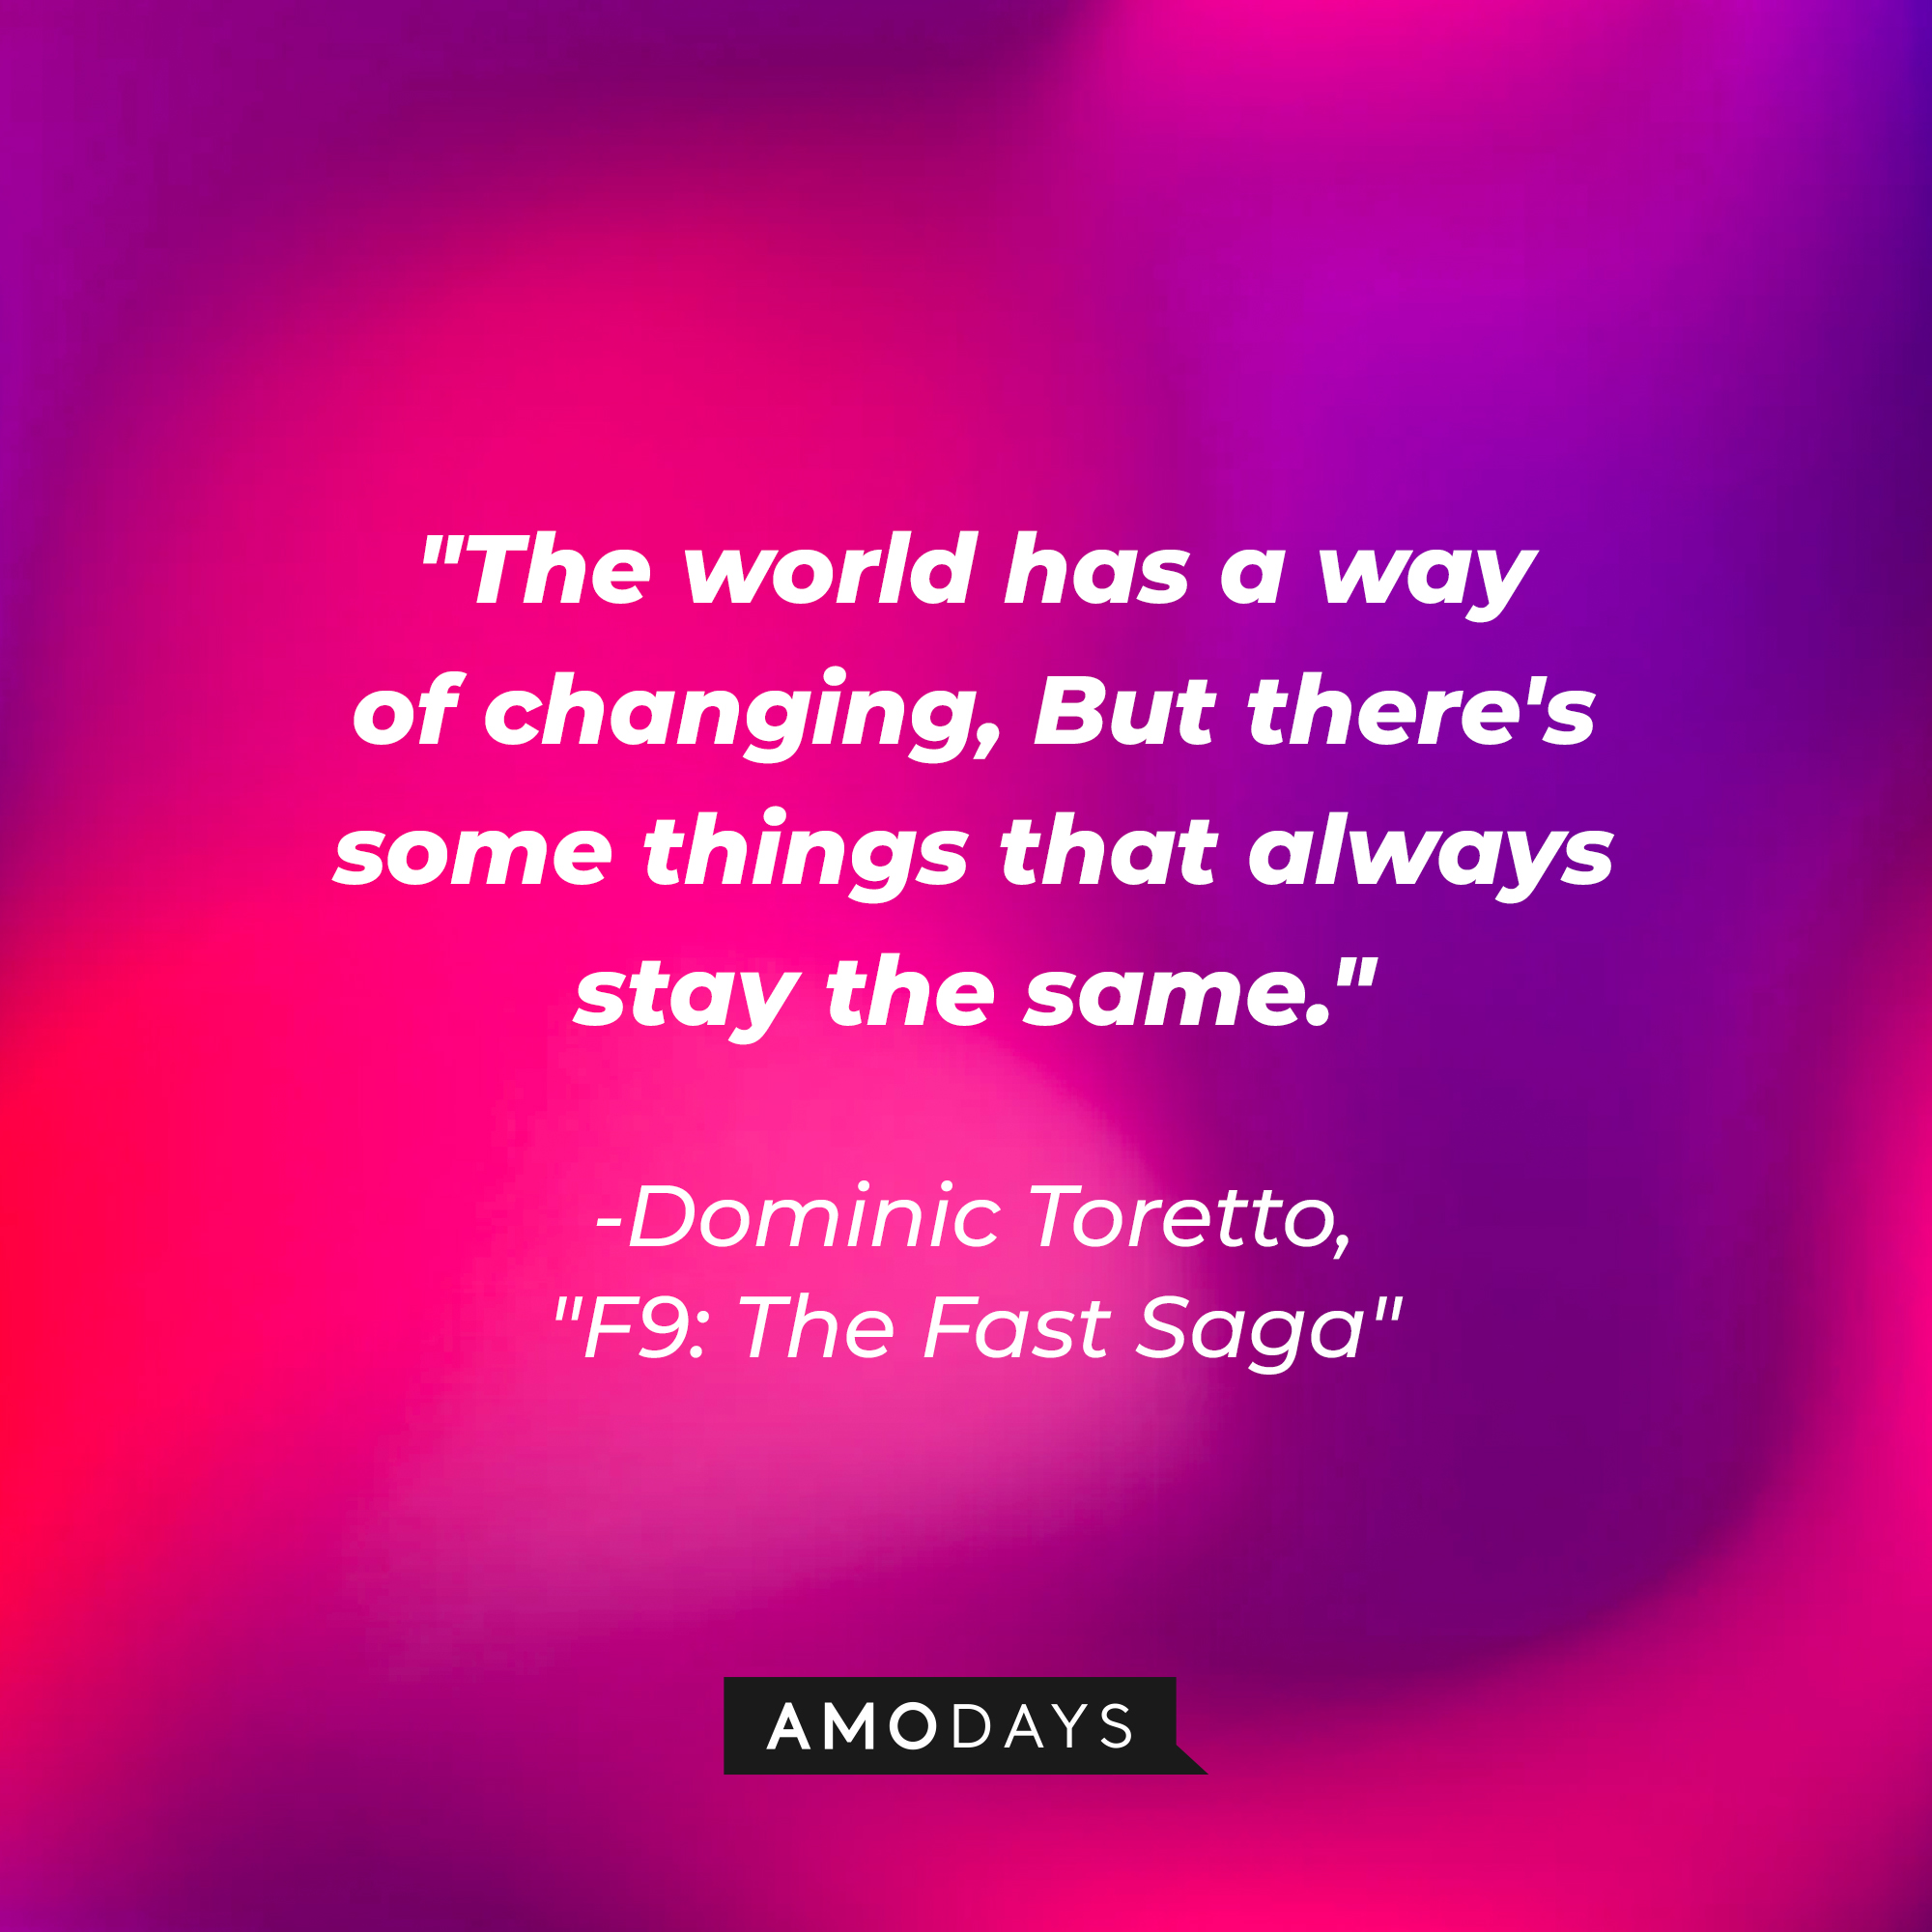 Dominic Toretto’s quote: "The world has a way of changing, But there's some things that always stay the same." | Image: AmoDays